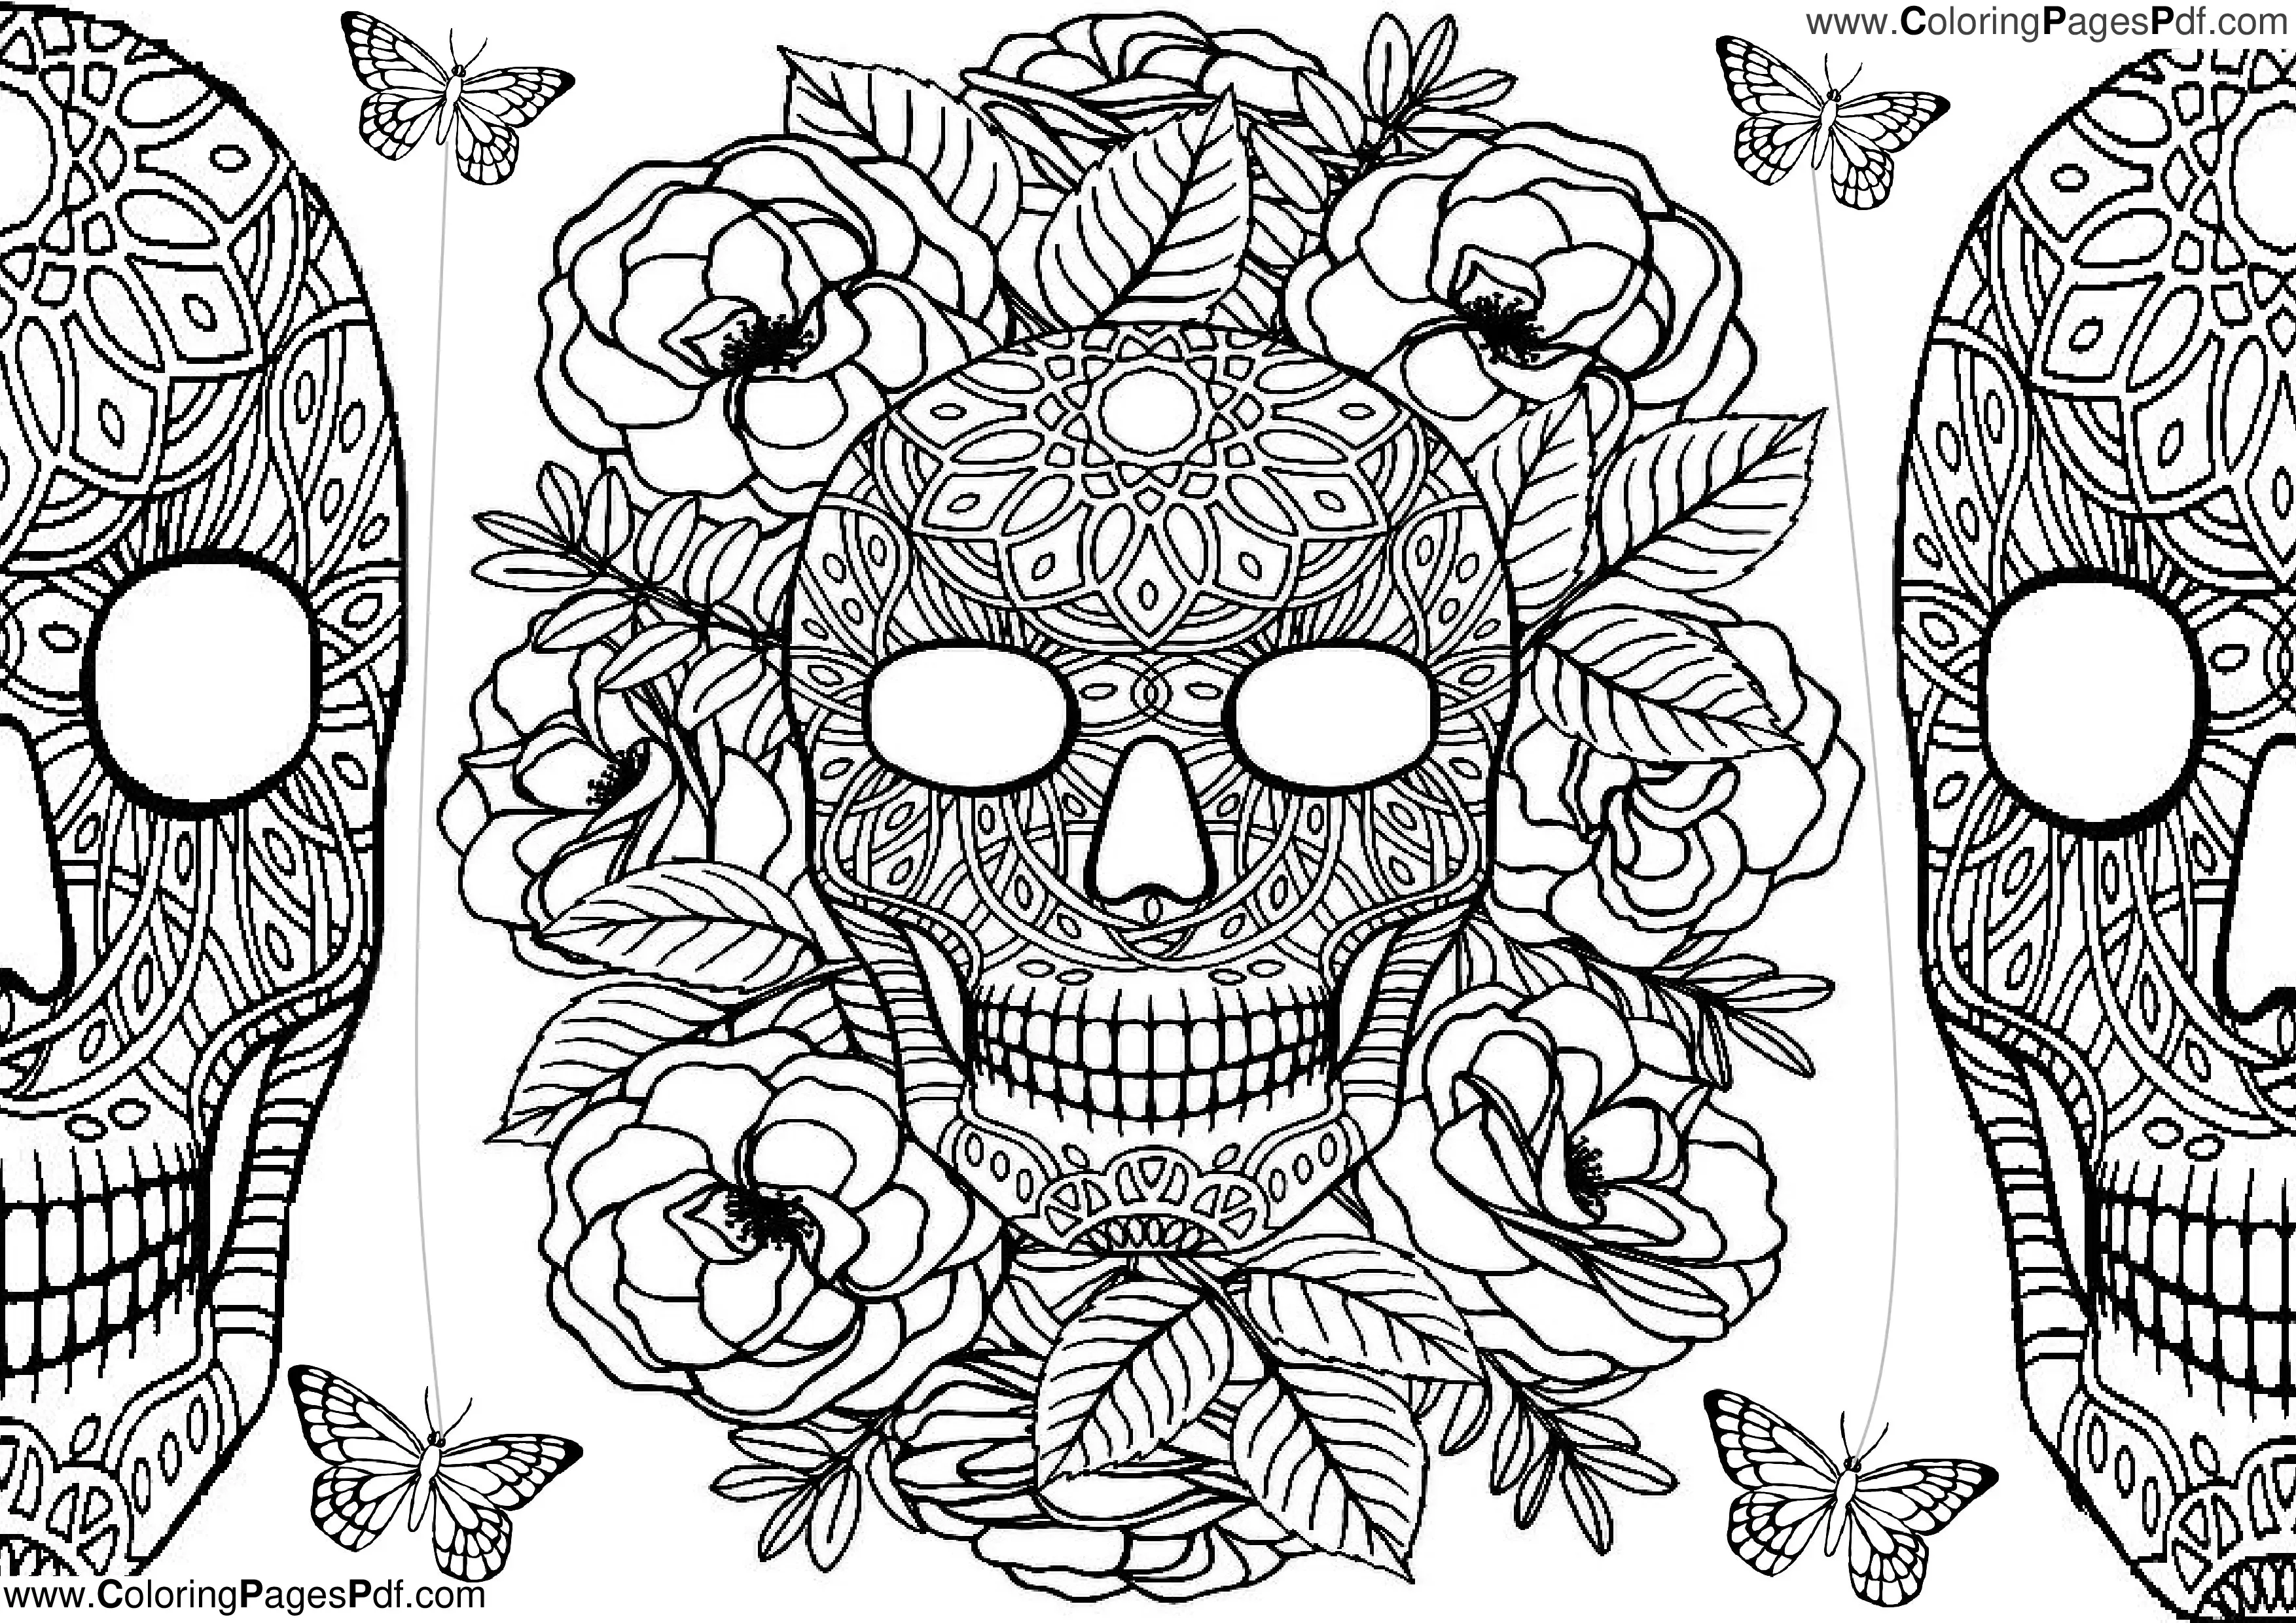 Hard rose coloring pages